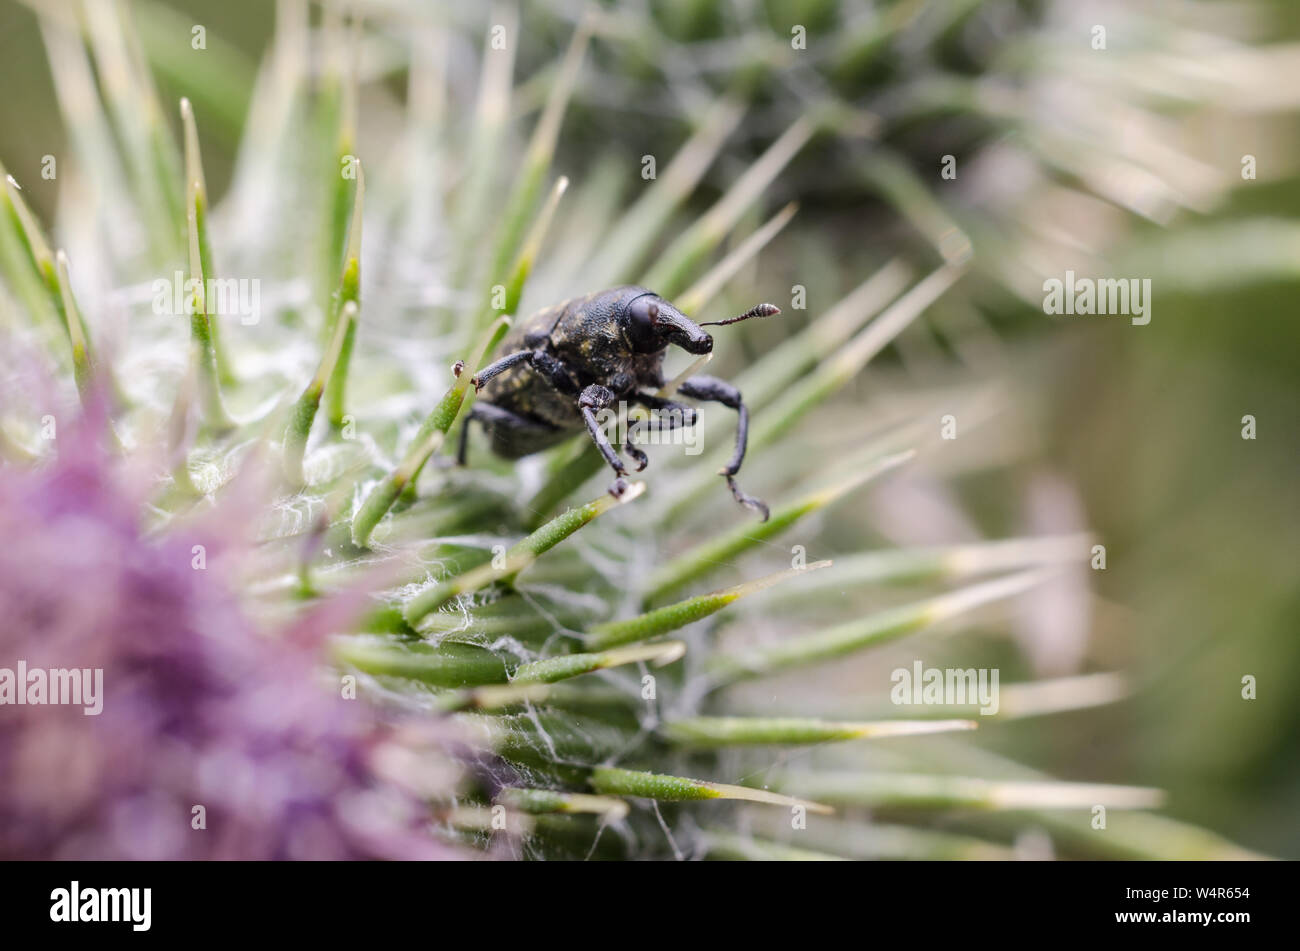 Curculionidae, Macro of a snout beetle on a spiky plant Stock Photo